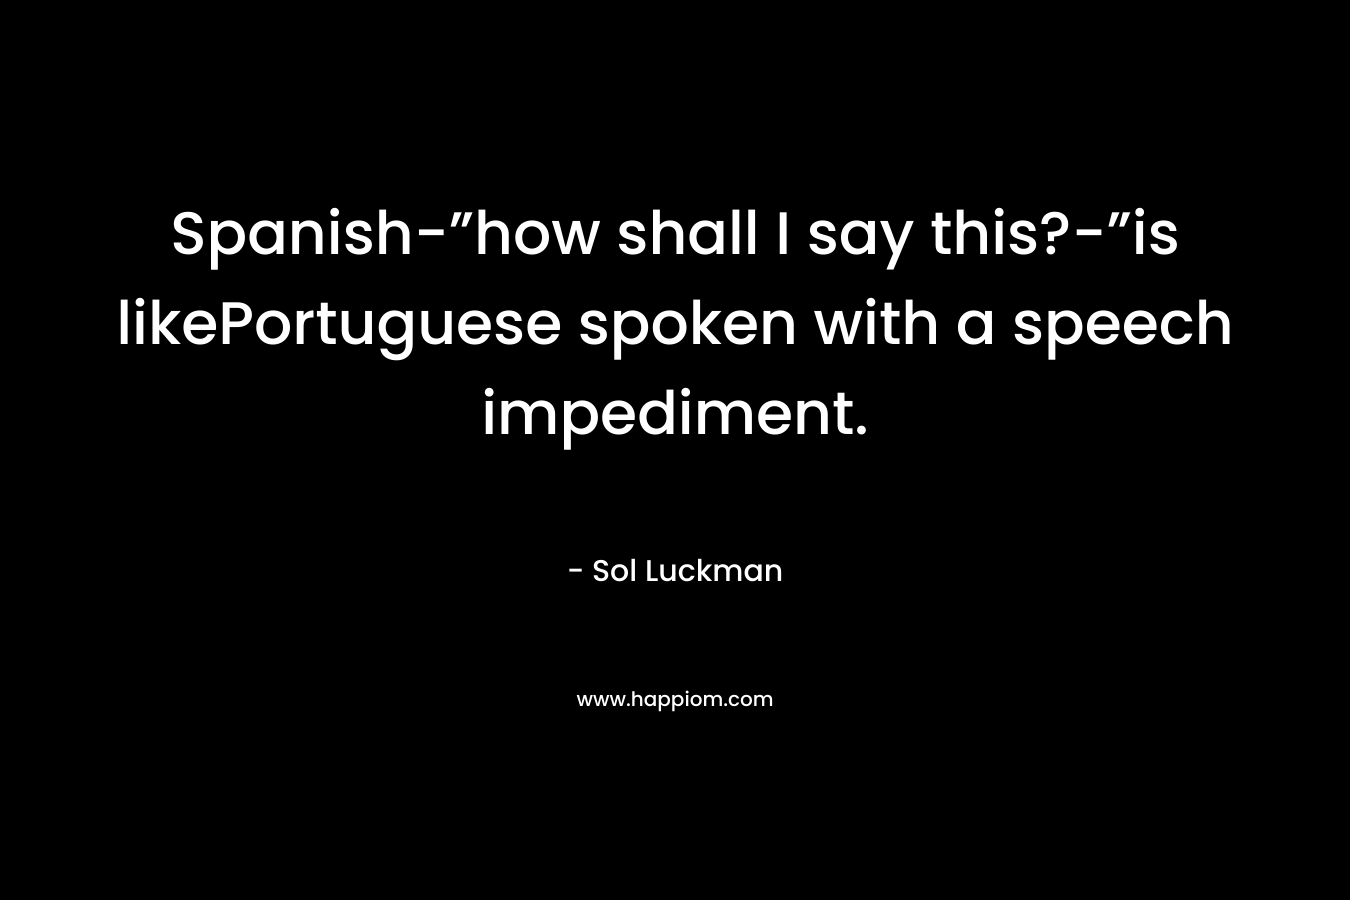 Spanish-”how shall I say this?-”is likePortuguese spoken with a speech impediment. – Sol Luckman